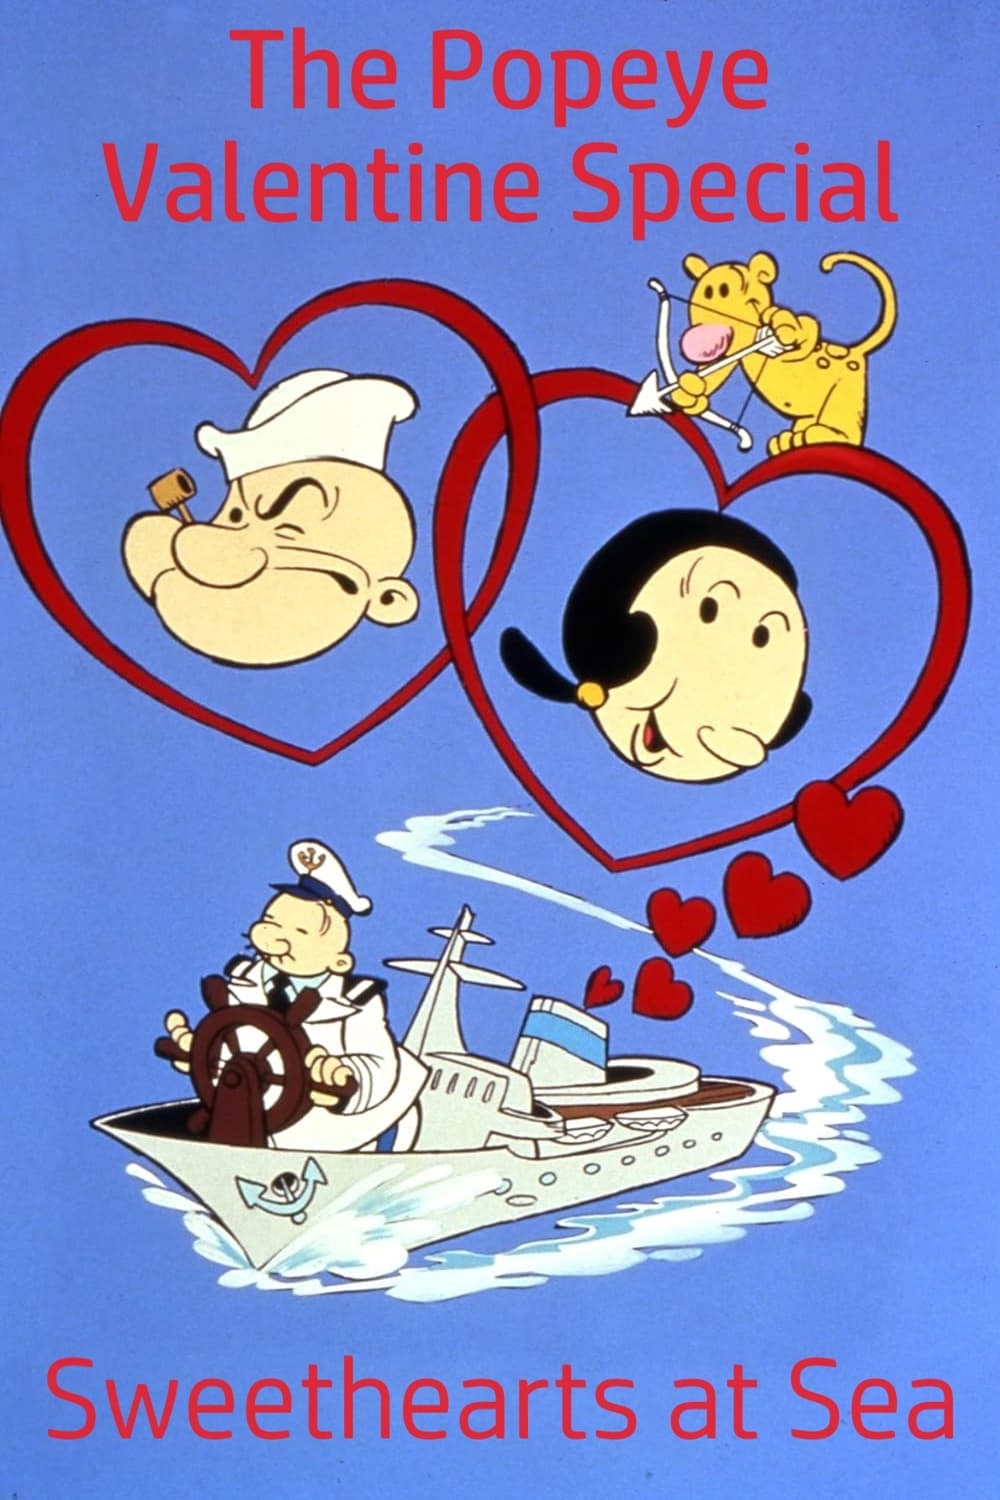 The Popeye Valentine Special: Sweethearts at Sea (1979)